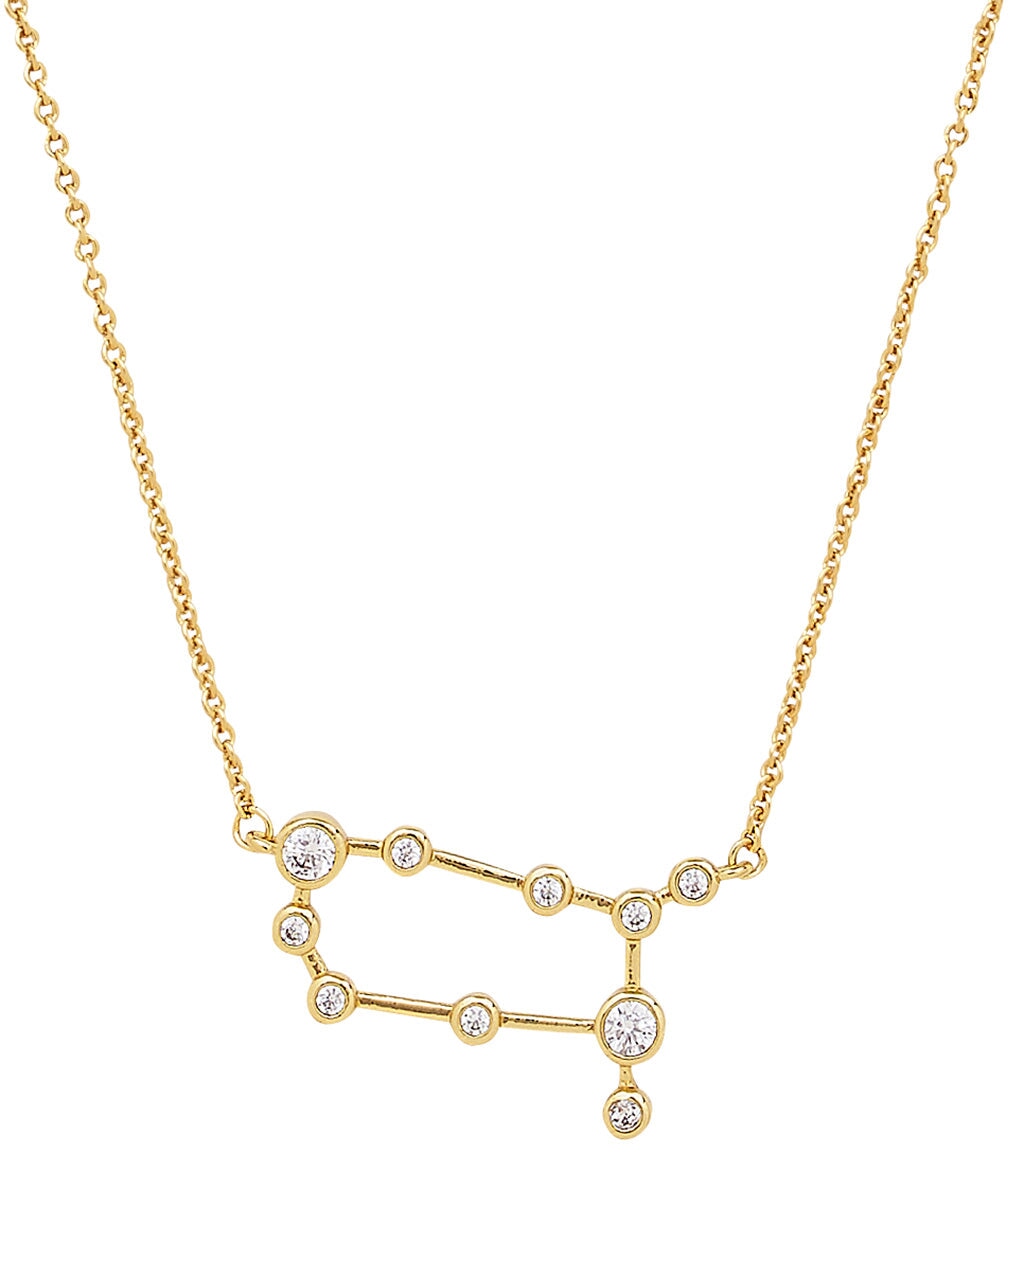 'When Stars Align' Constellation Necklace Necklace Sterling Forever Gold Gemini (May 21 - Jun 20) 